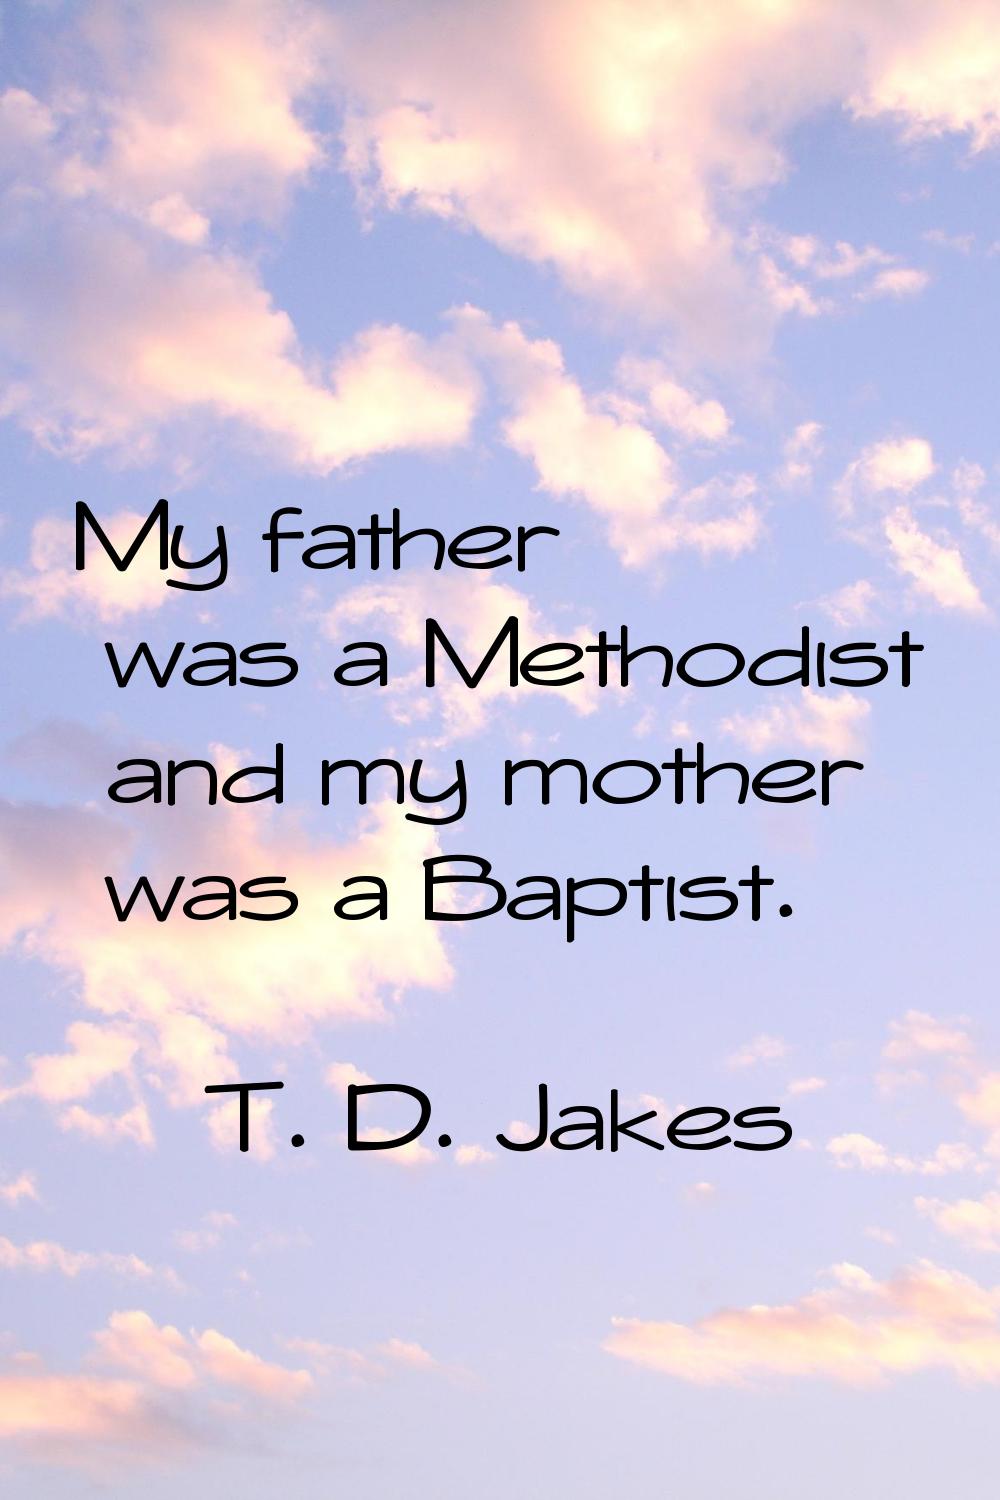 My father was a Methodist and my mother was a Baptist.